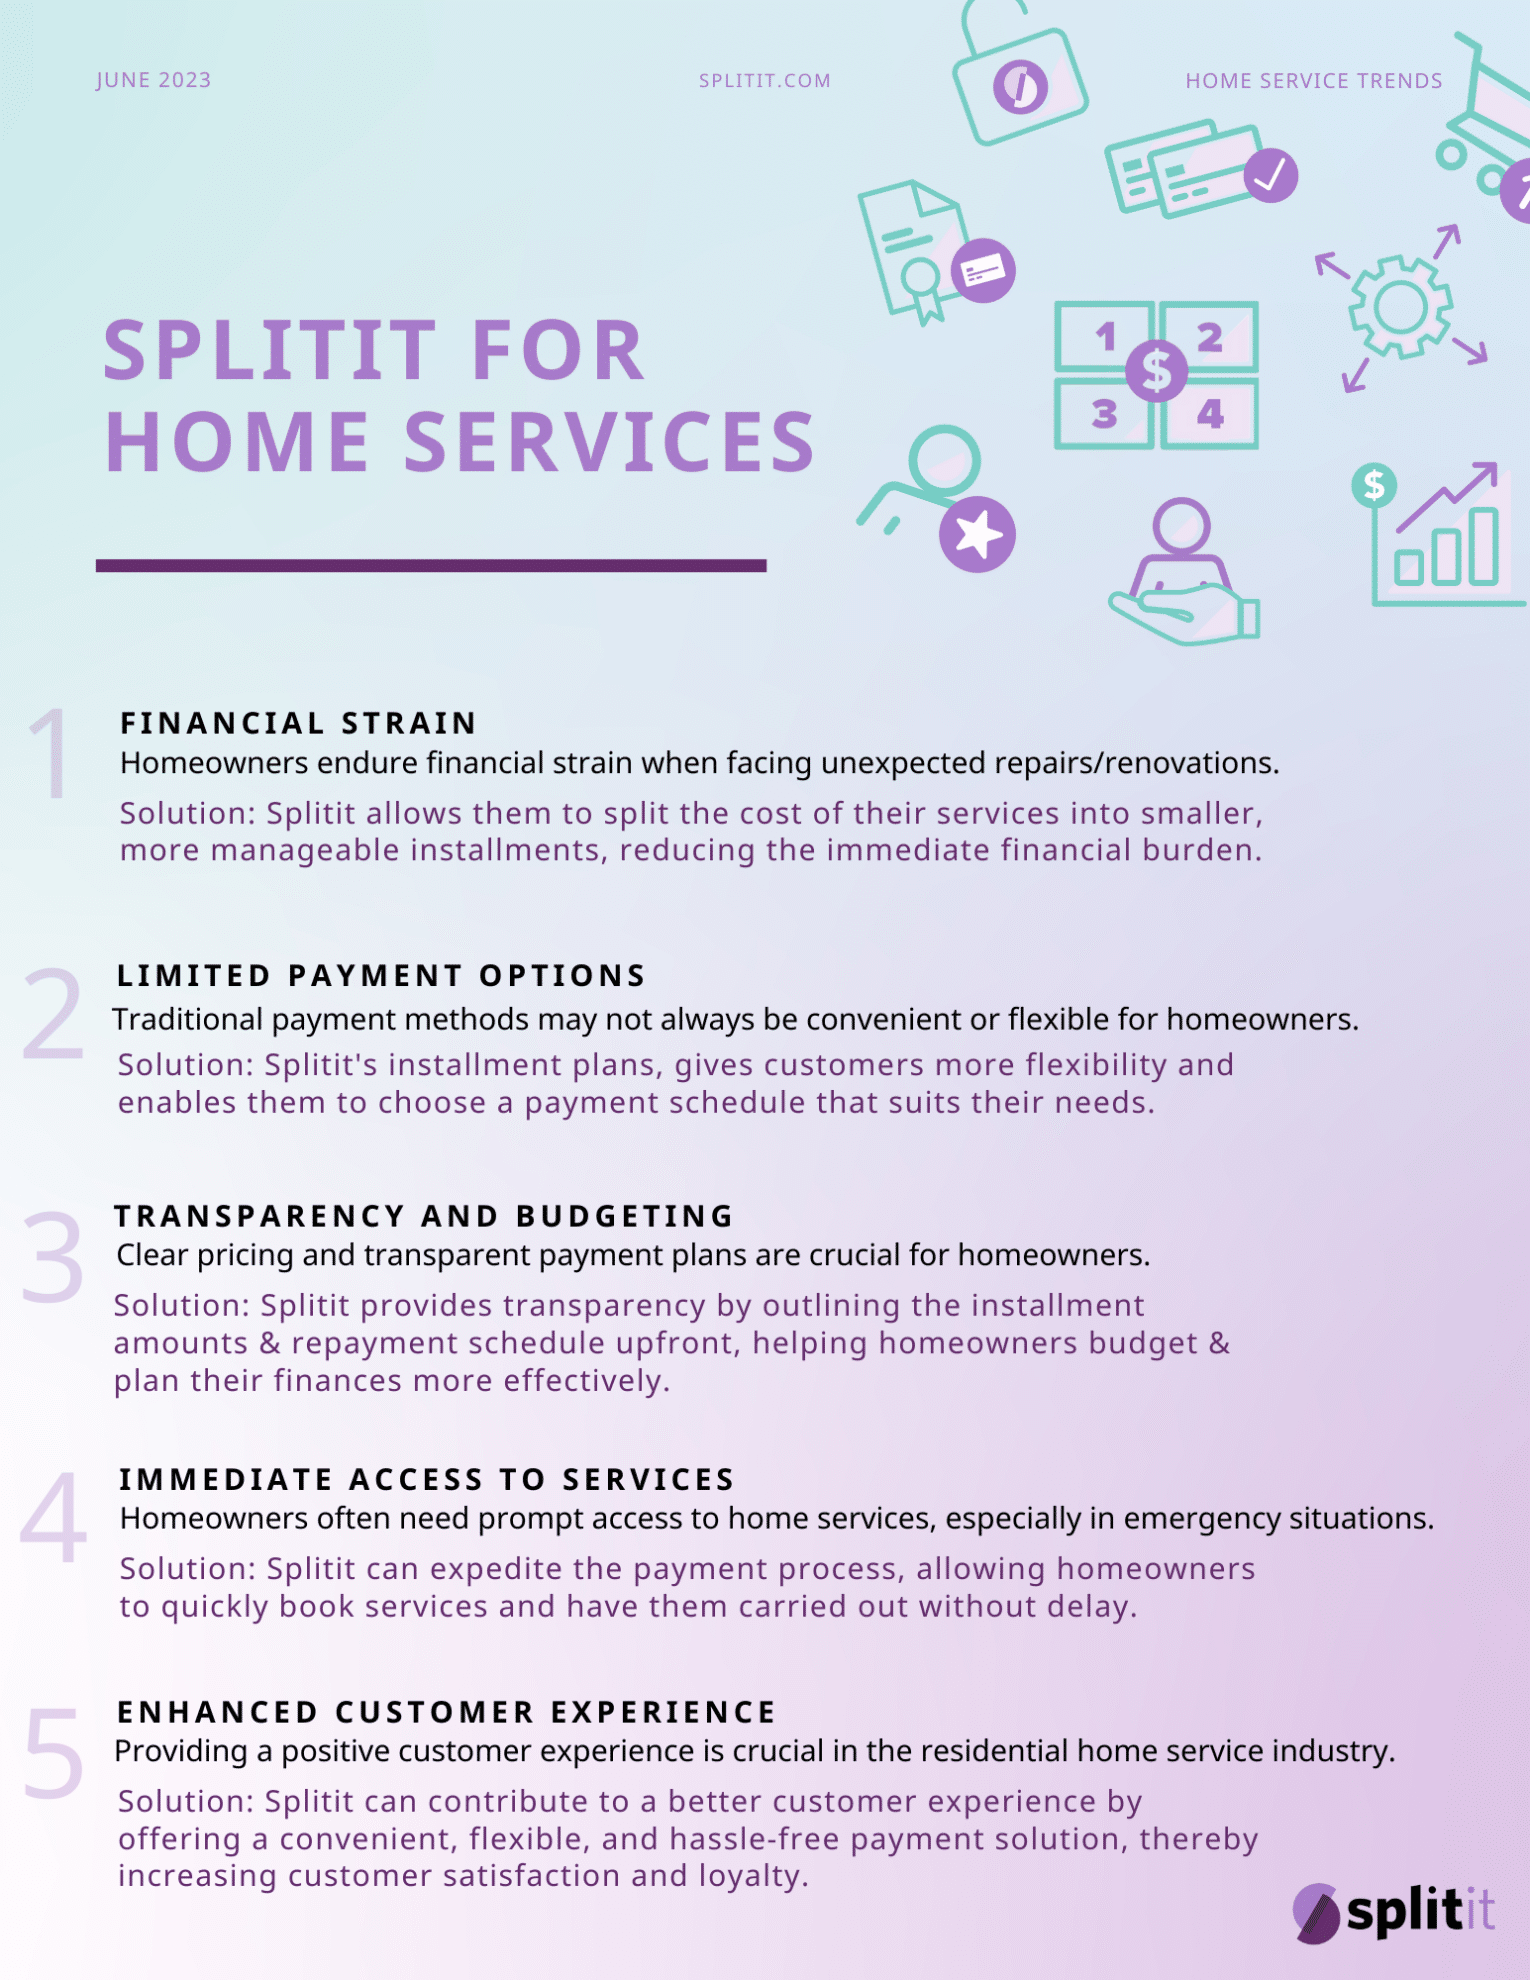 Consumer Insights: Home Service Trends